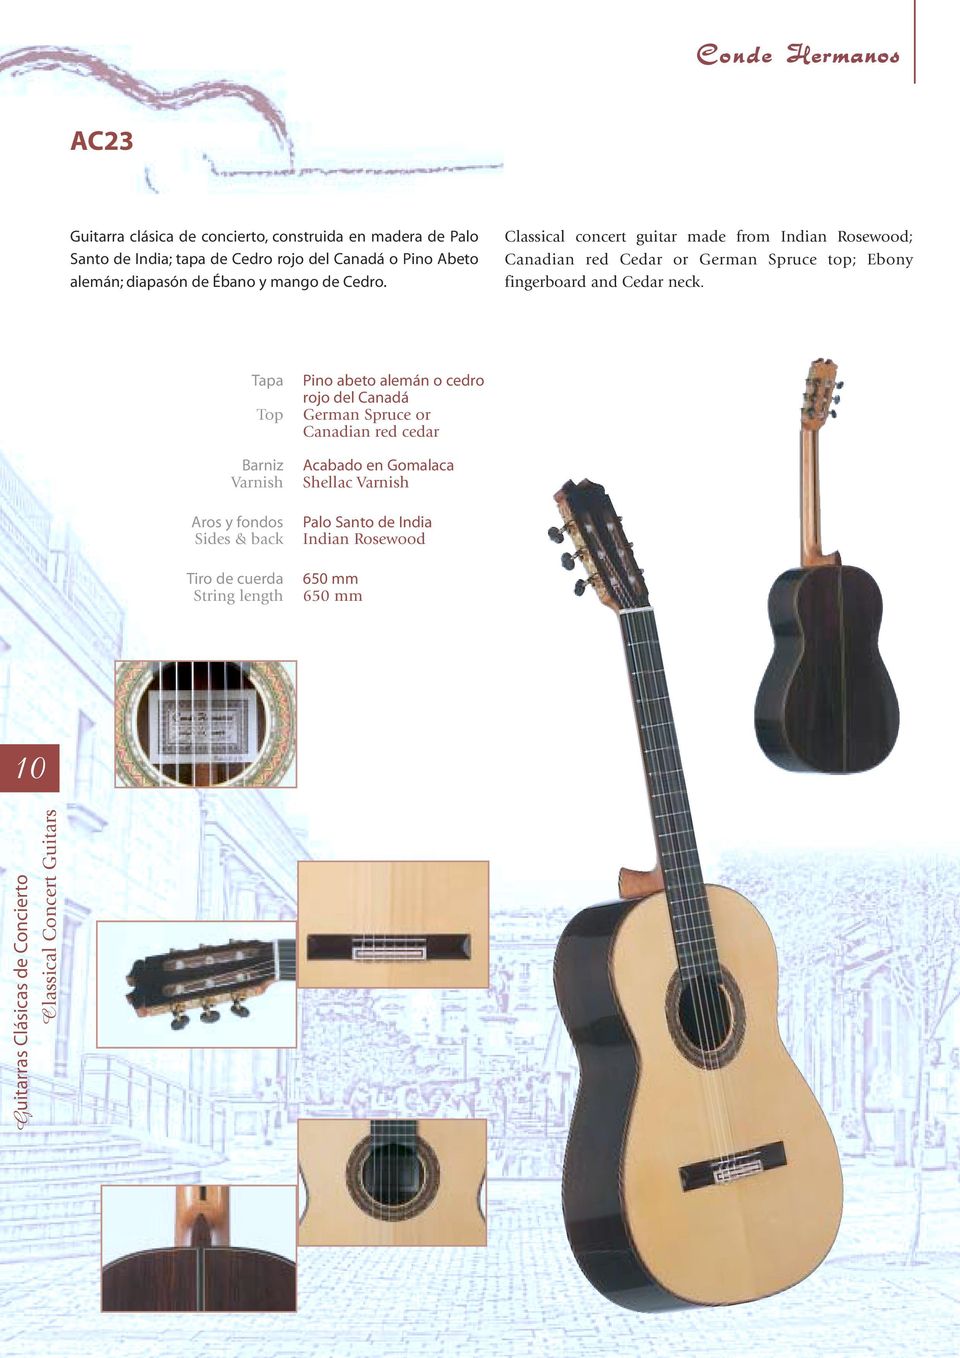 Classical concert guitar made from Indian Rosewood; Canadian red Cedar or German Spruce top; Ebony fingerboard and Cedar